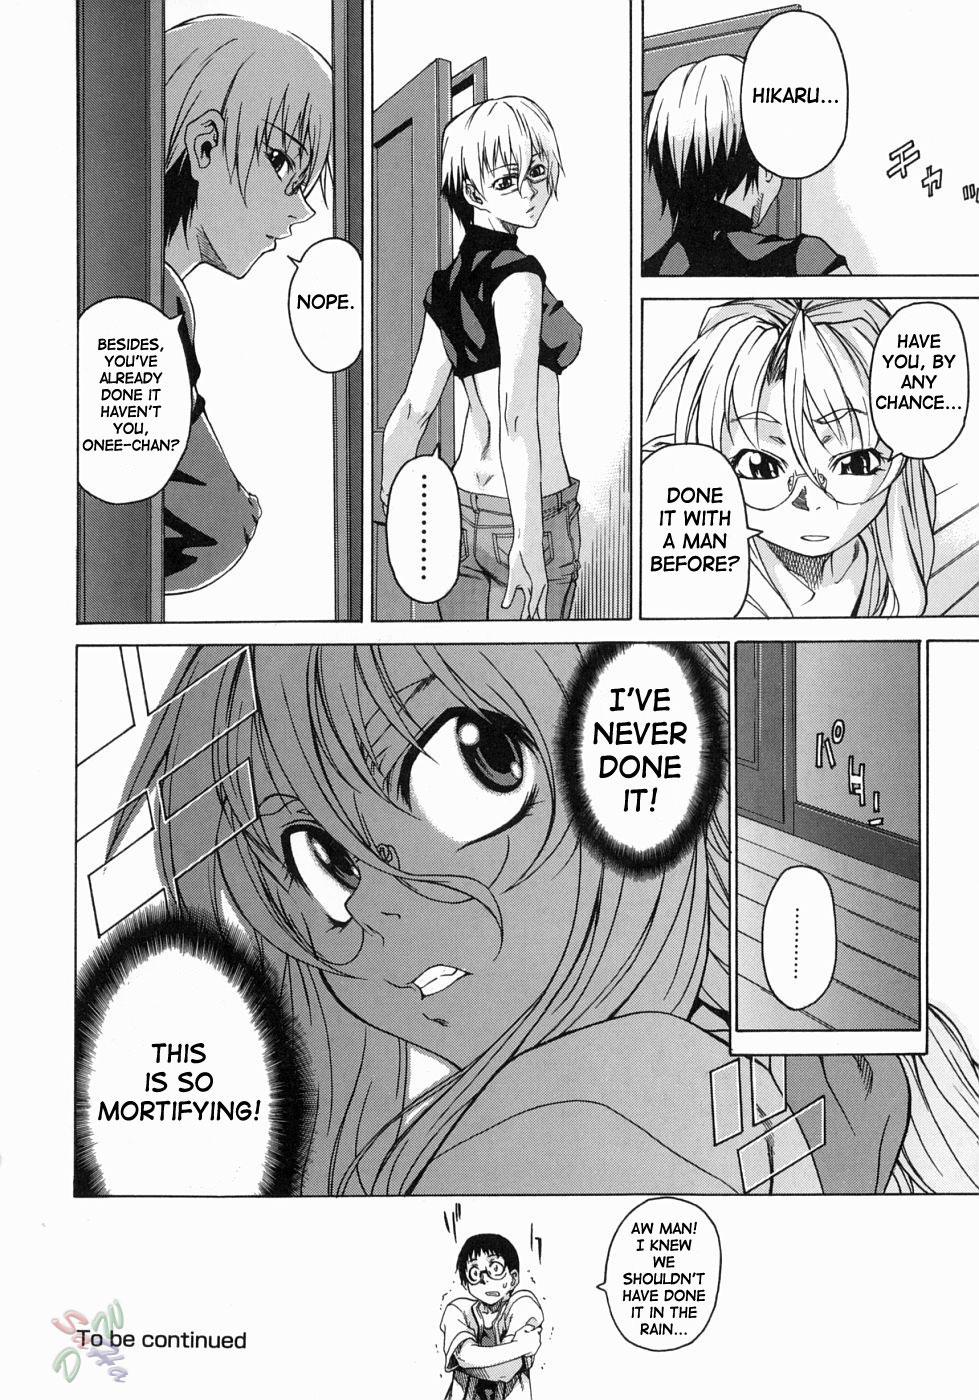 Take On Me Page 74 Of 223 uncensored hentai, Take On Me Page 74 Of 223 he.....